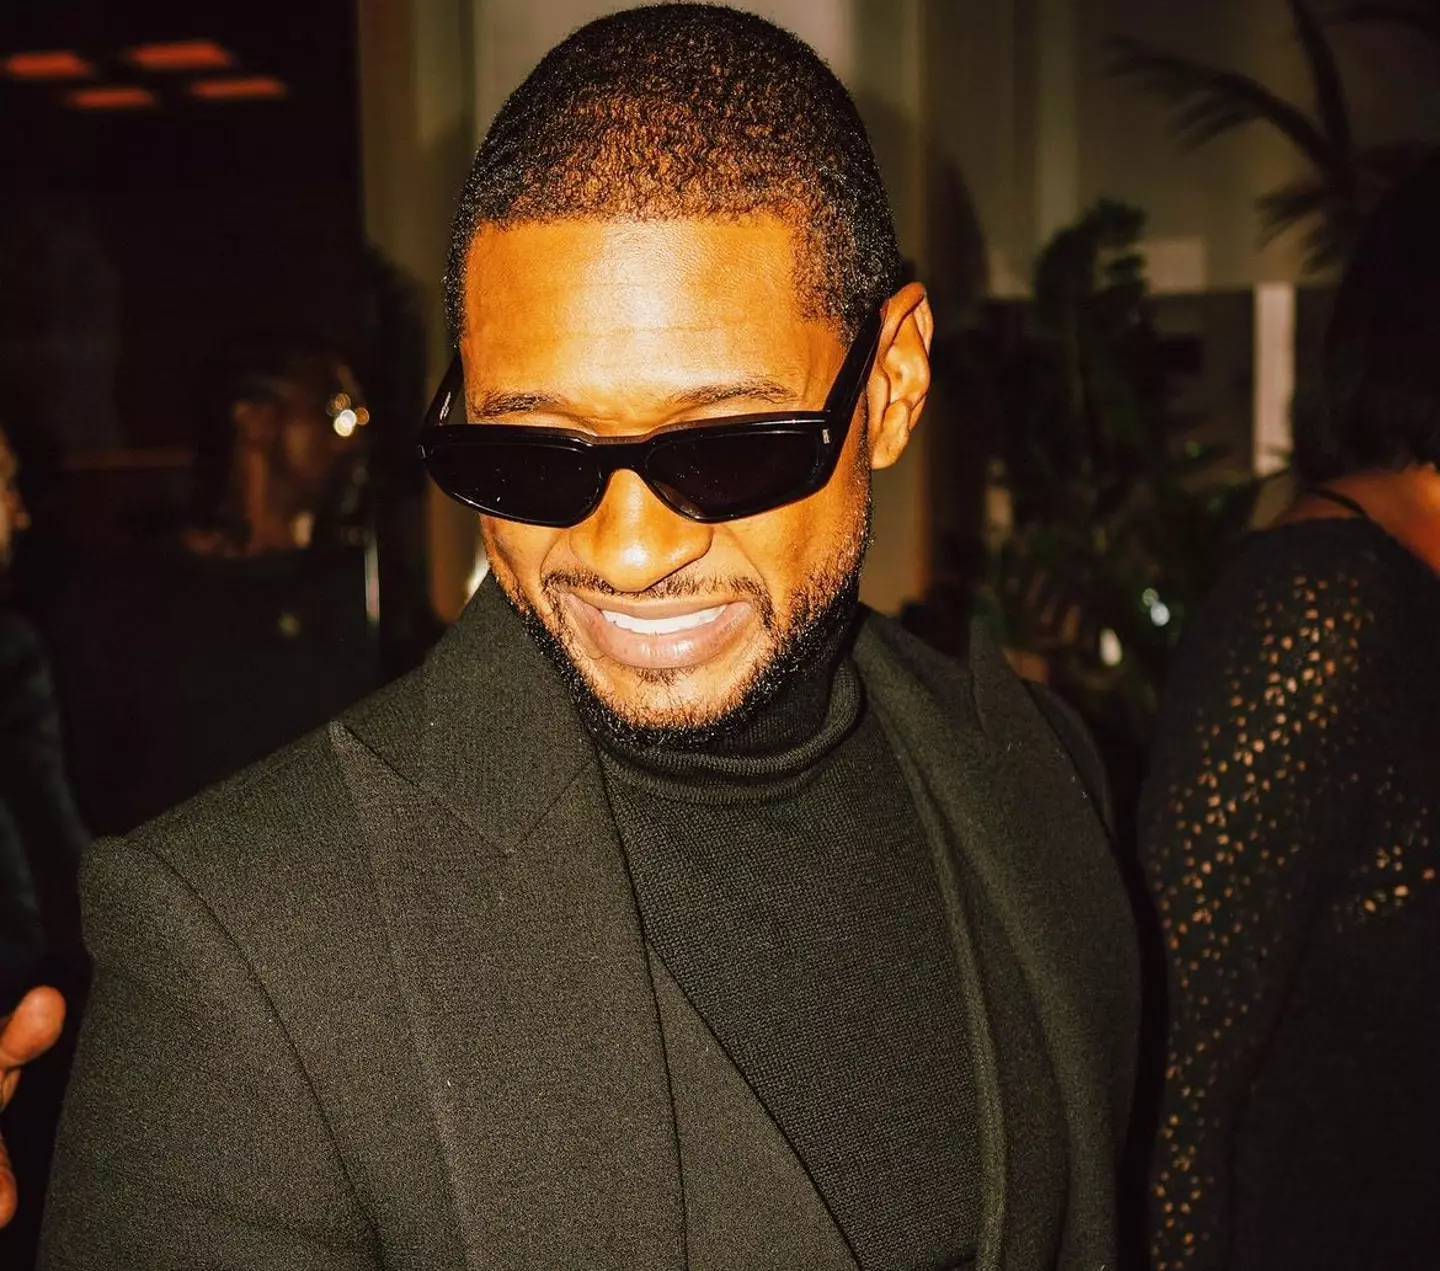 Usher has collaborated with Alicia Keys, Pitbull and Justin Bieber.